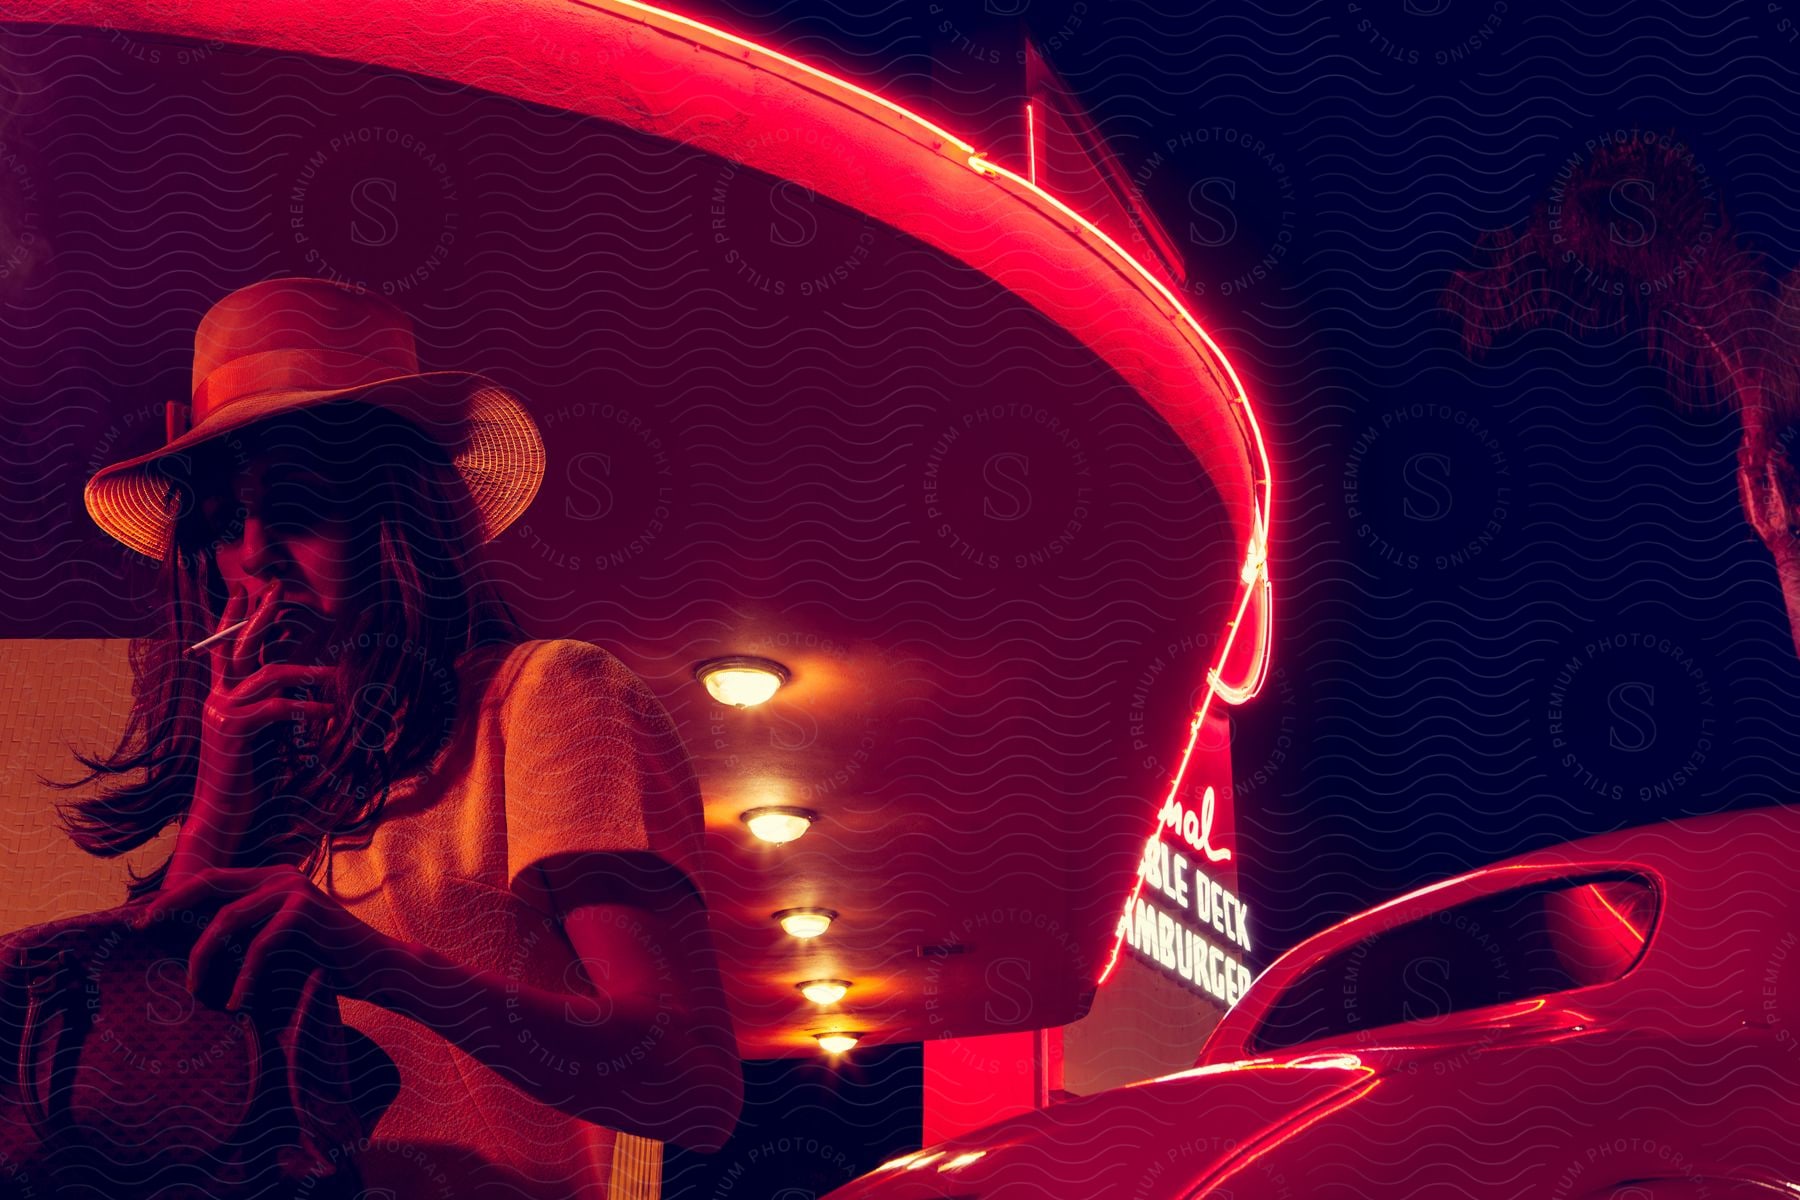 A woman in a straw hat smokes next to a car at a hamburger restaurant lit by neon